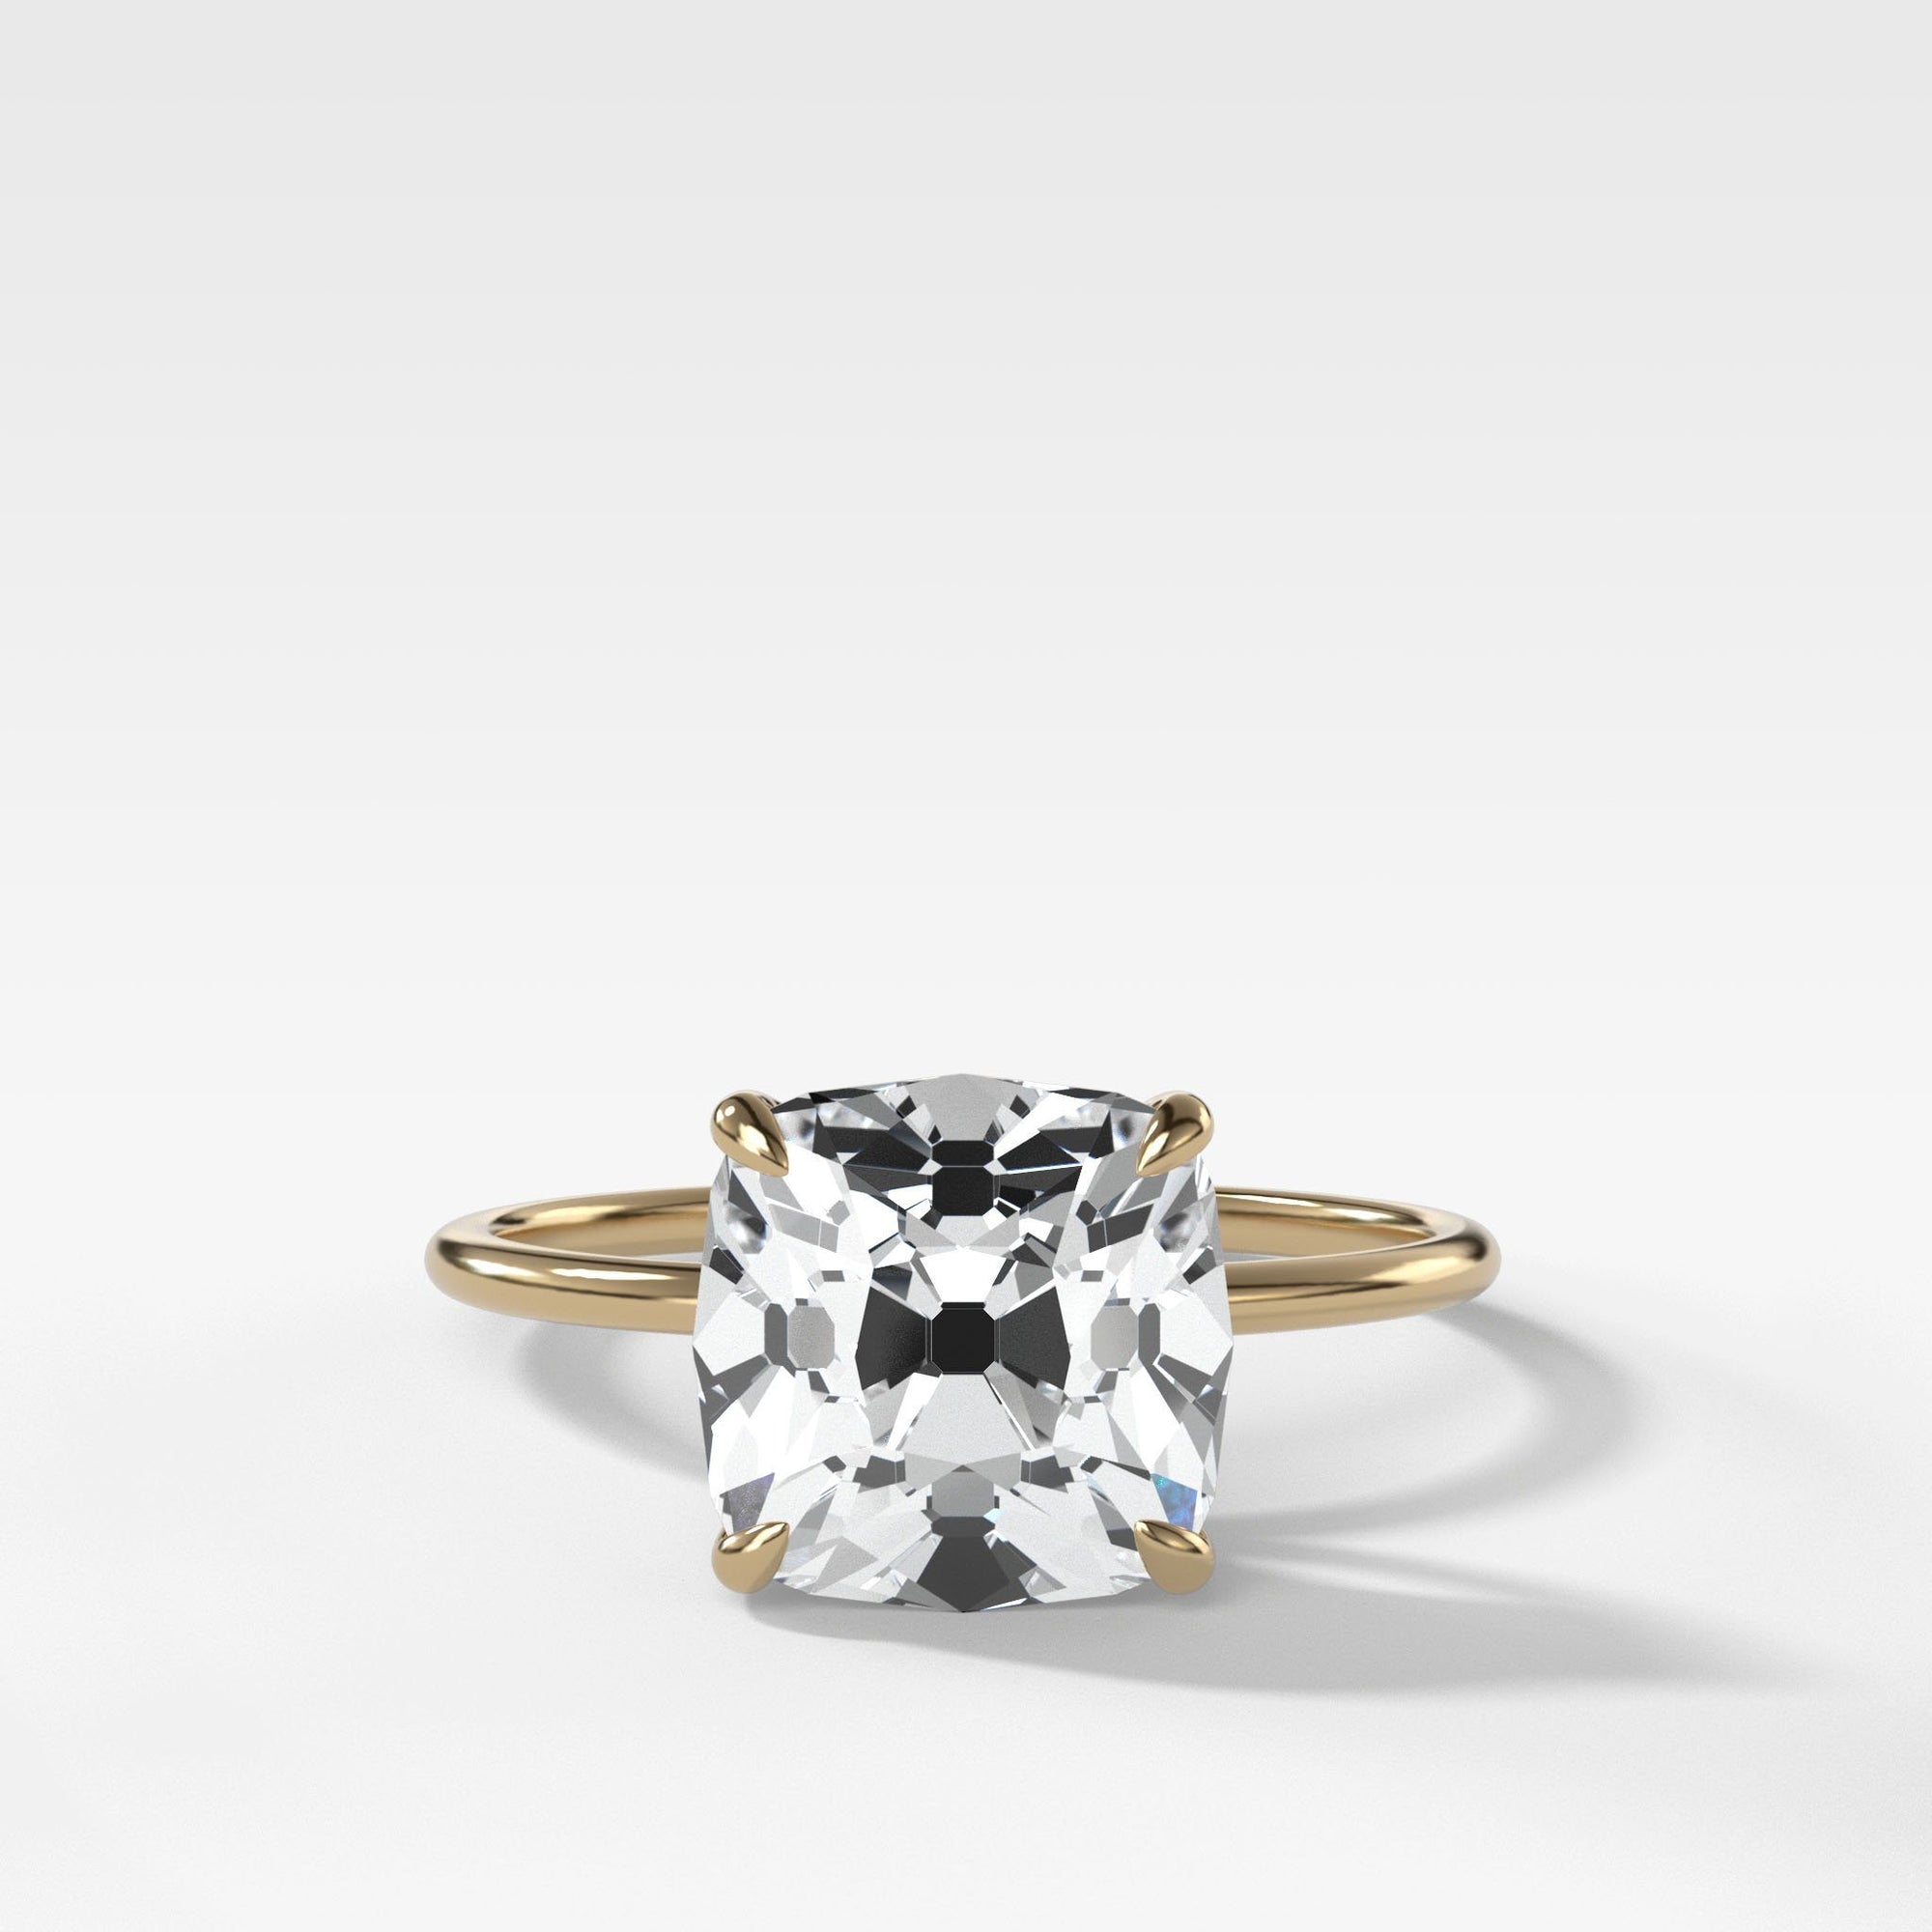 Thin + Simple Solitaire With Old Mine Cut by Good Stone in Yellow Gold